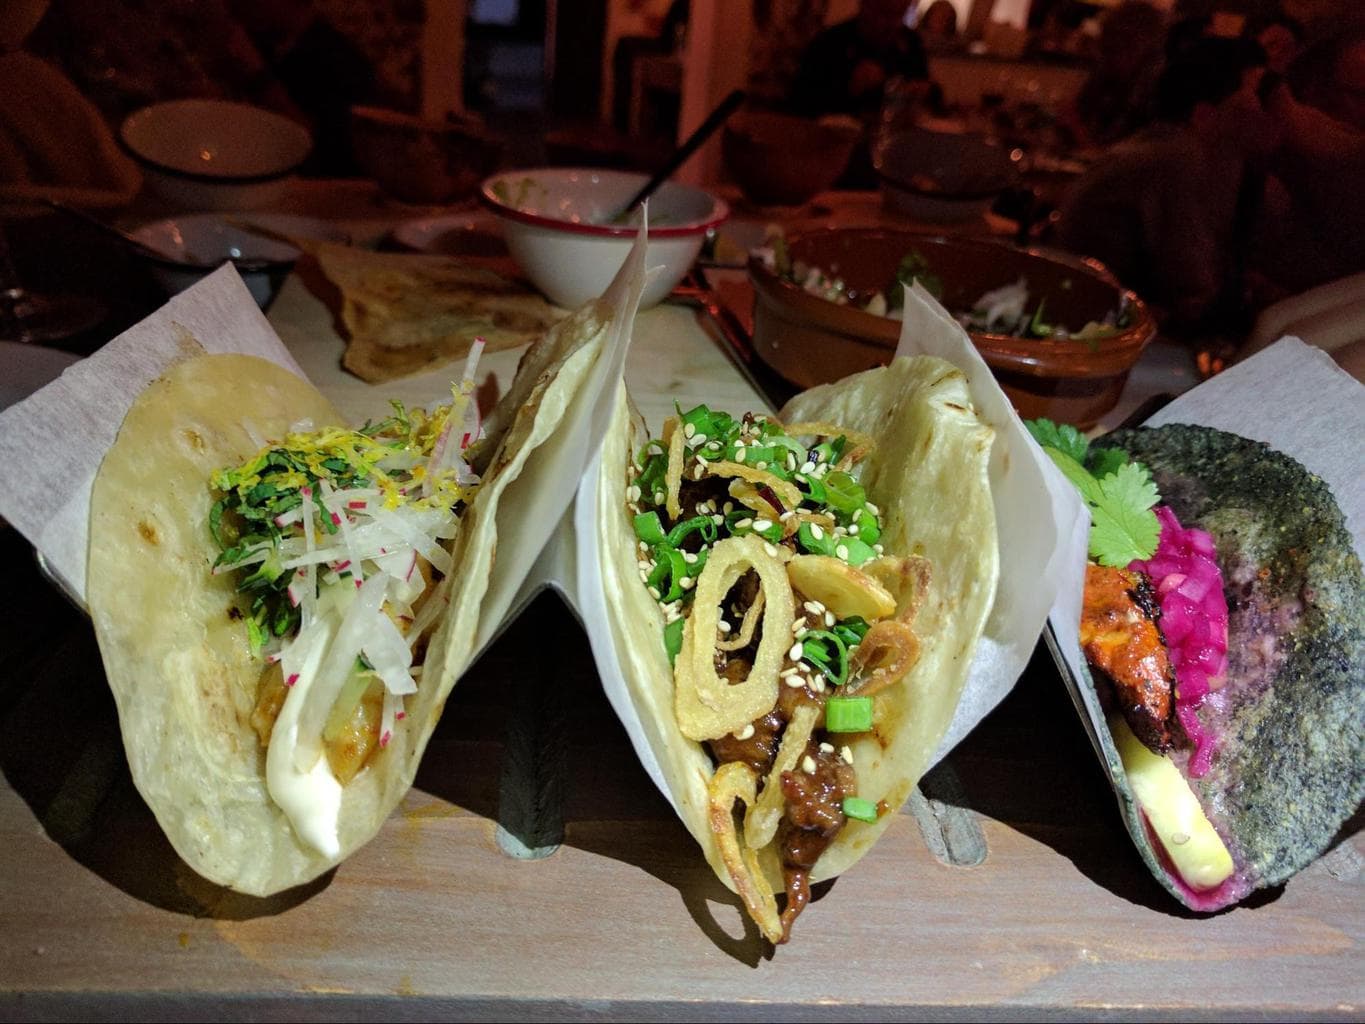 Typical wavy tray to serve tacos